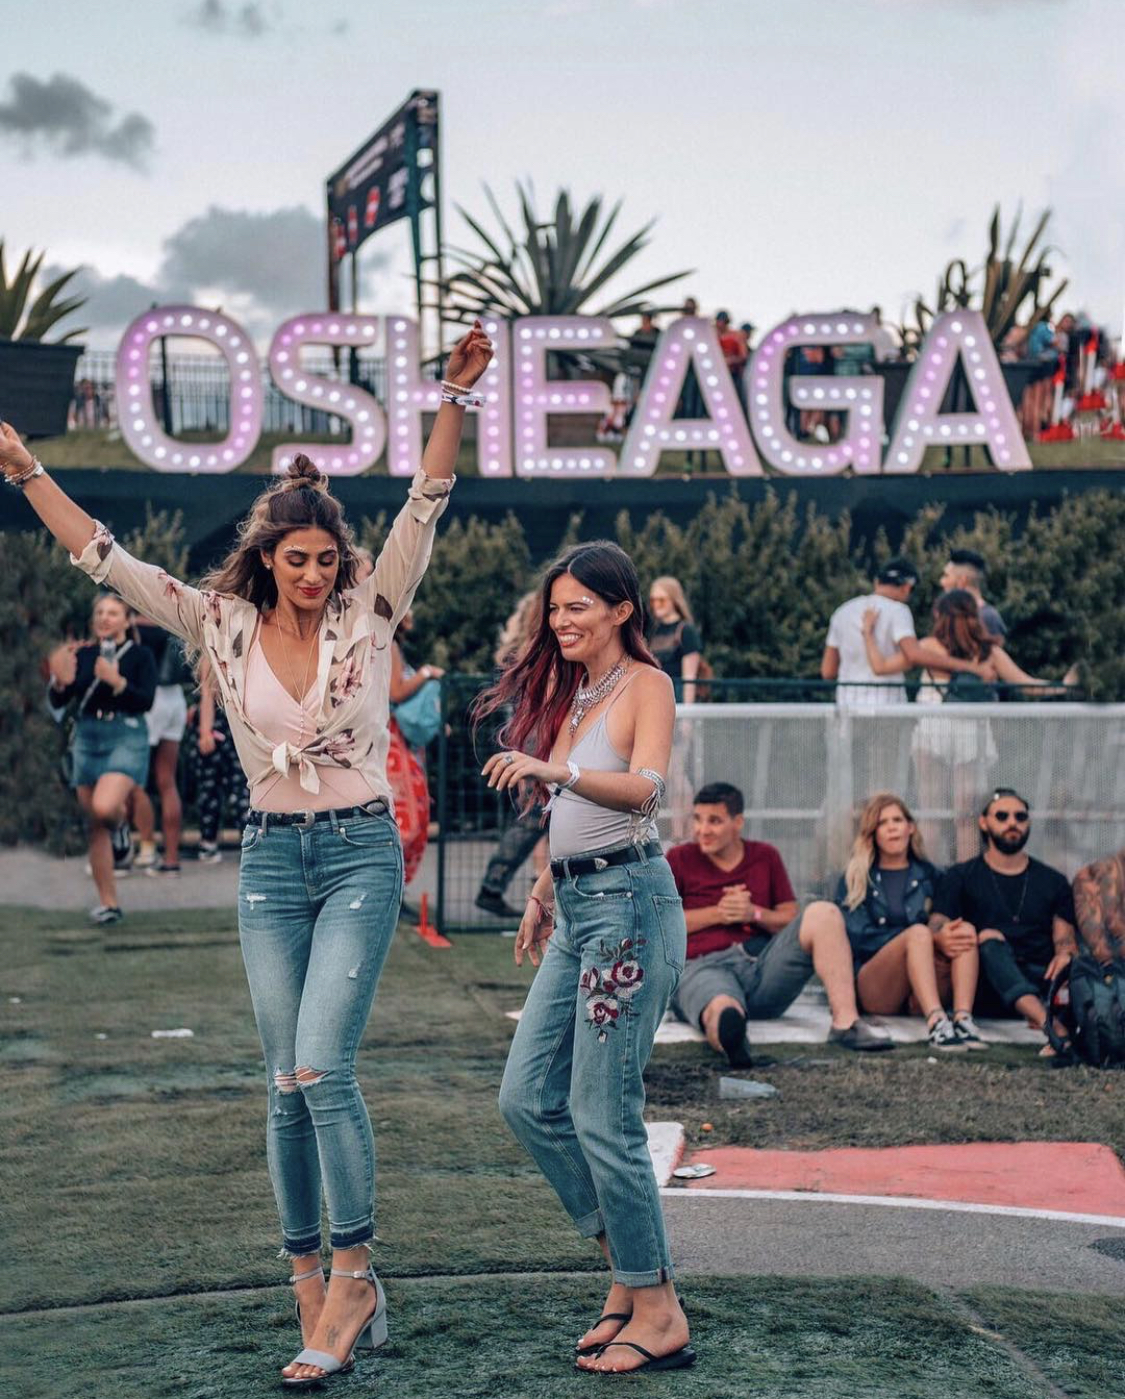 Things to do in Montreal in the Summer include the best festivals in Montreal like Osheaga